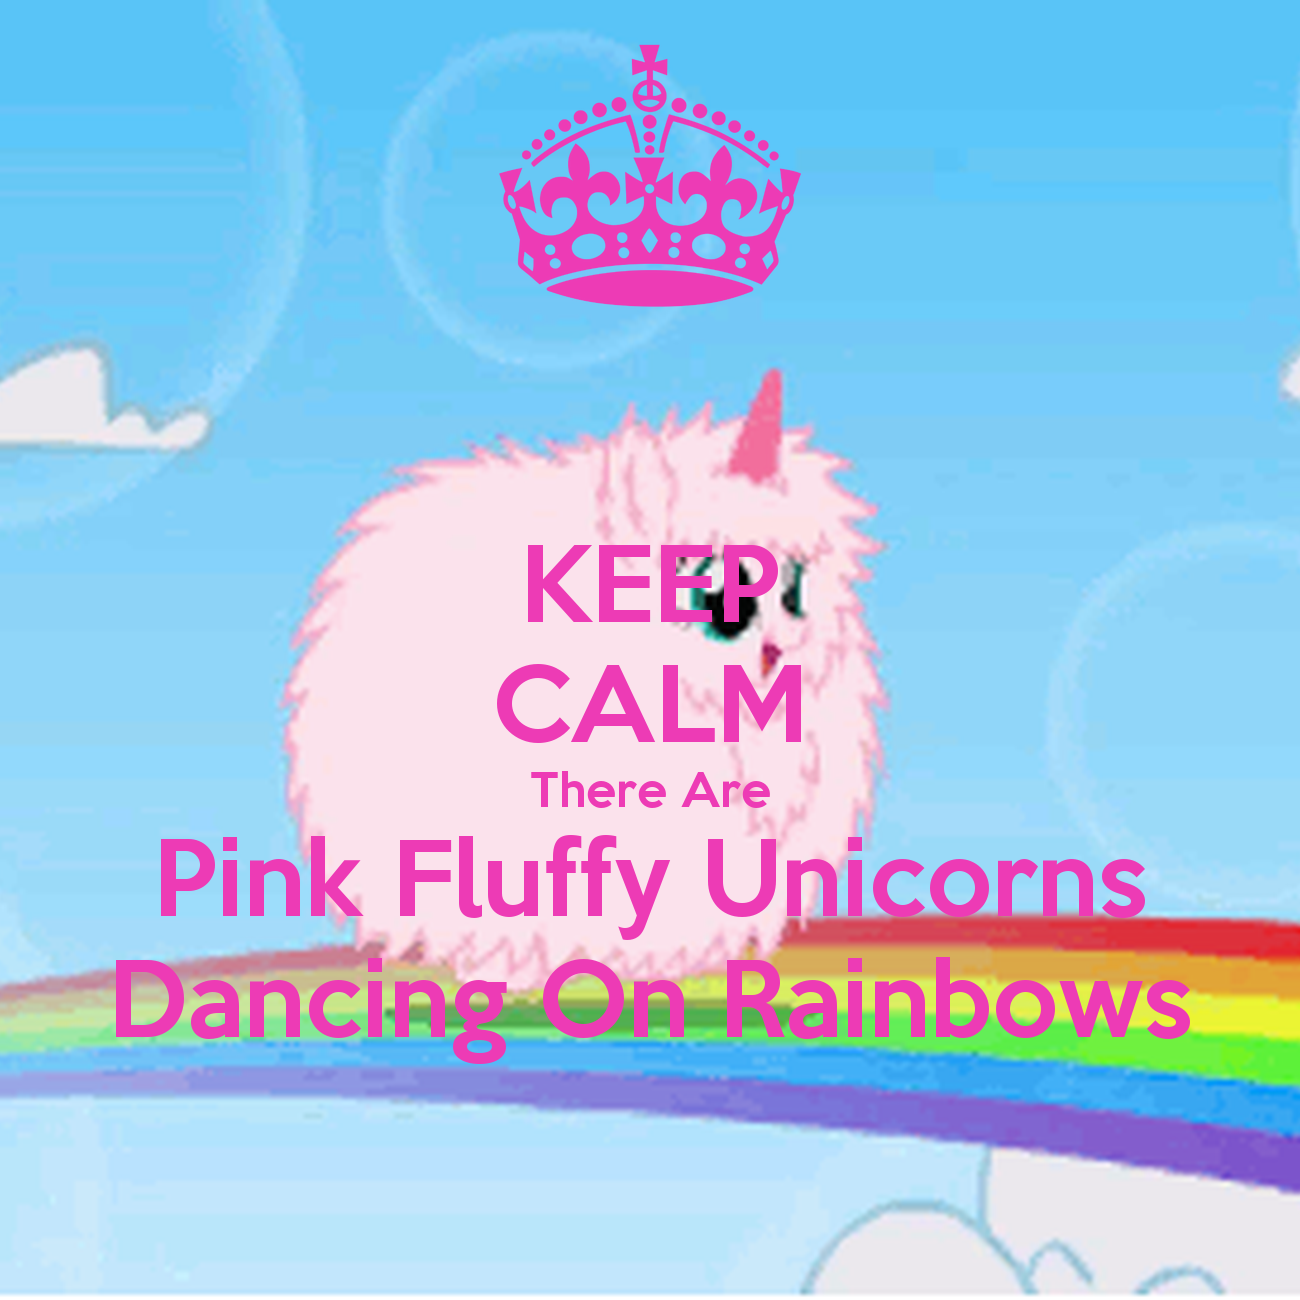 Keep Calm There Are Pink Fluffy Unicorns Dancing On Rainbows